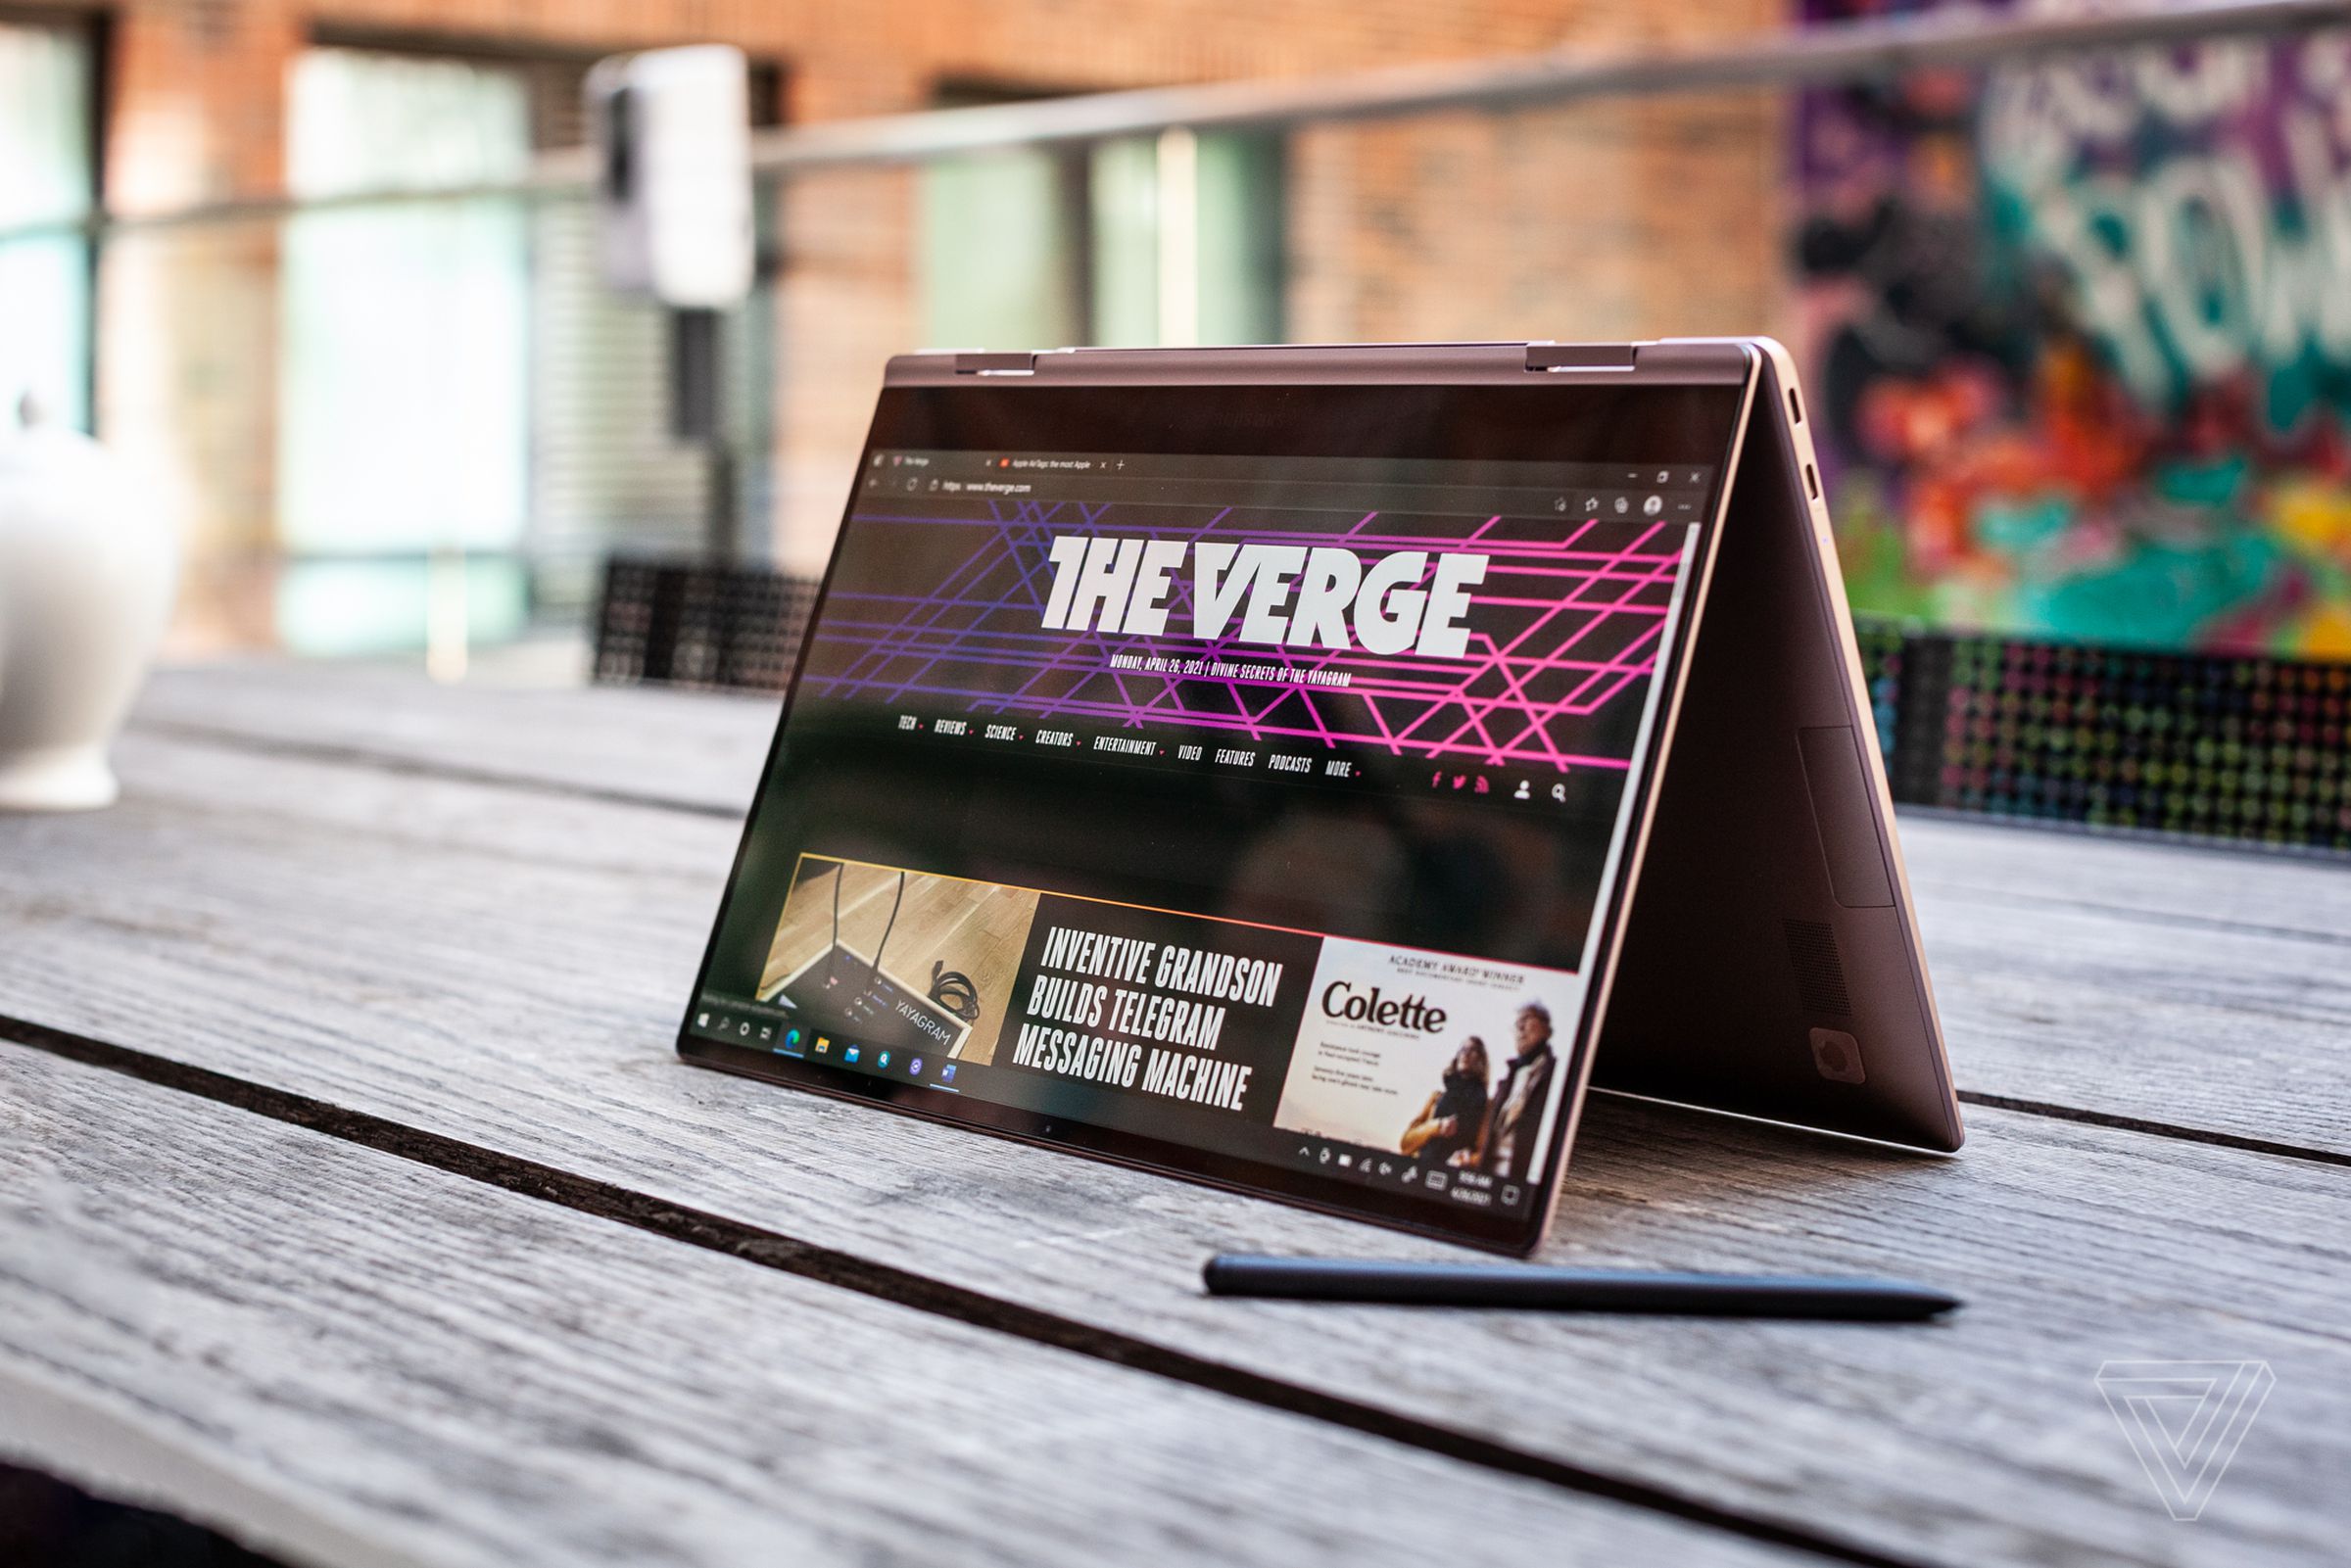 The Samsung Galaxy Book Pro 360 in tent mode, angled to the left, on an outdoor picnic table. The screen displays The Verge homepage. The S-Pen sits by its bottom right corner.